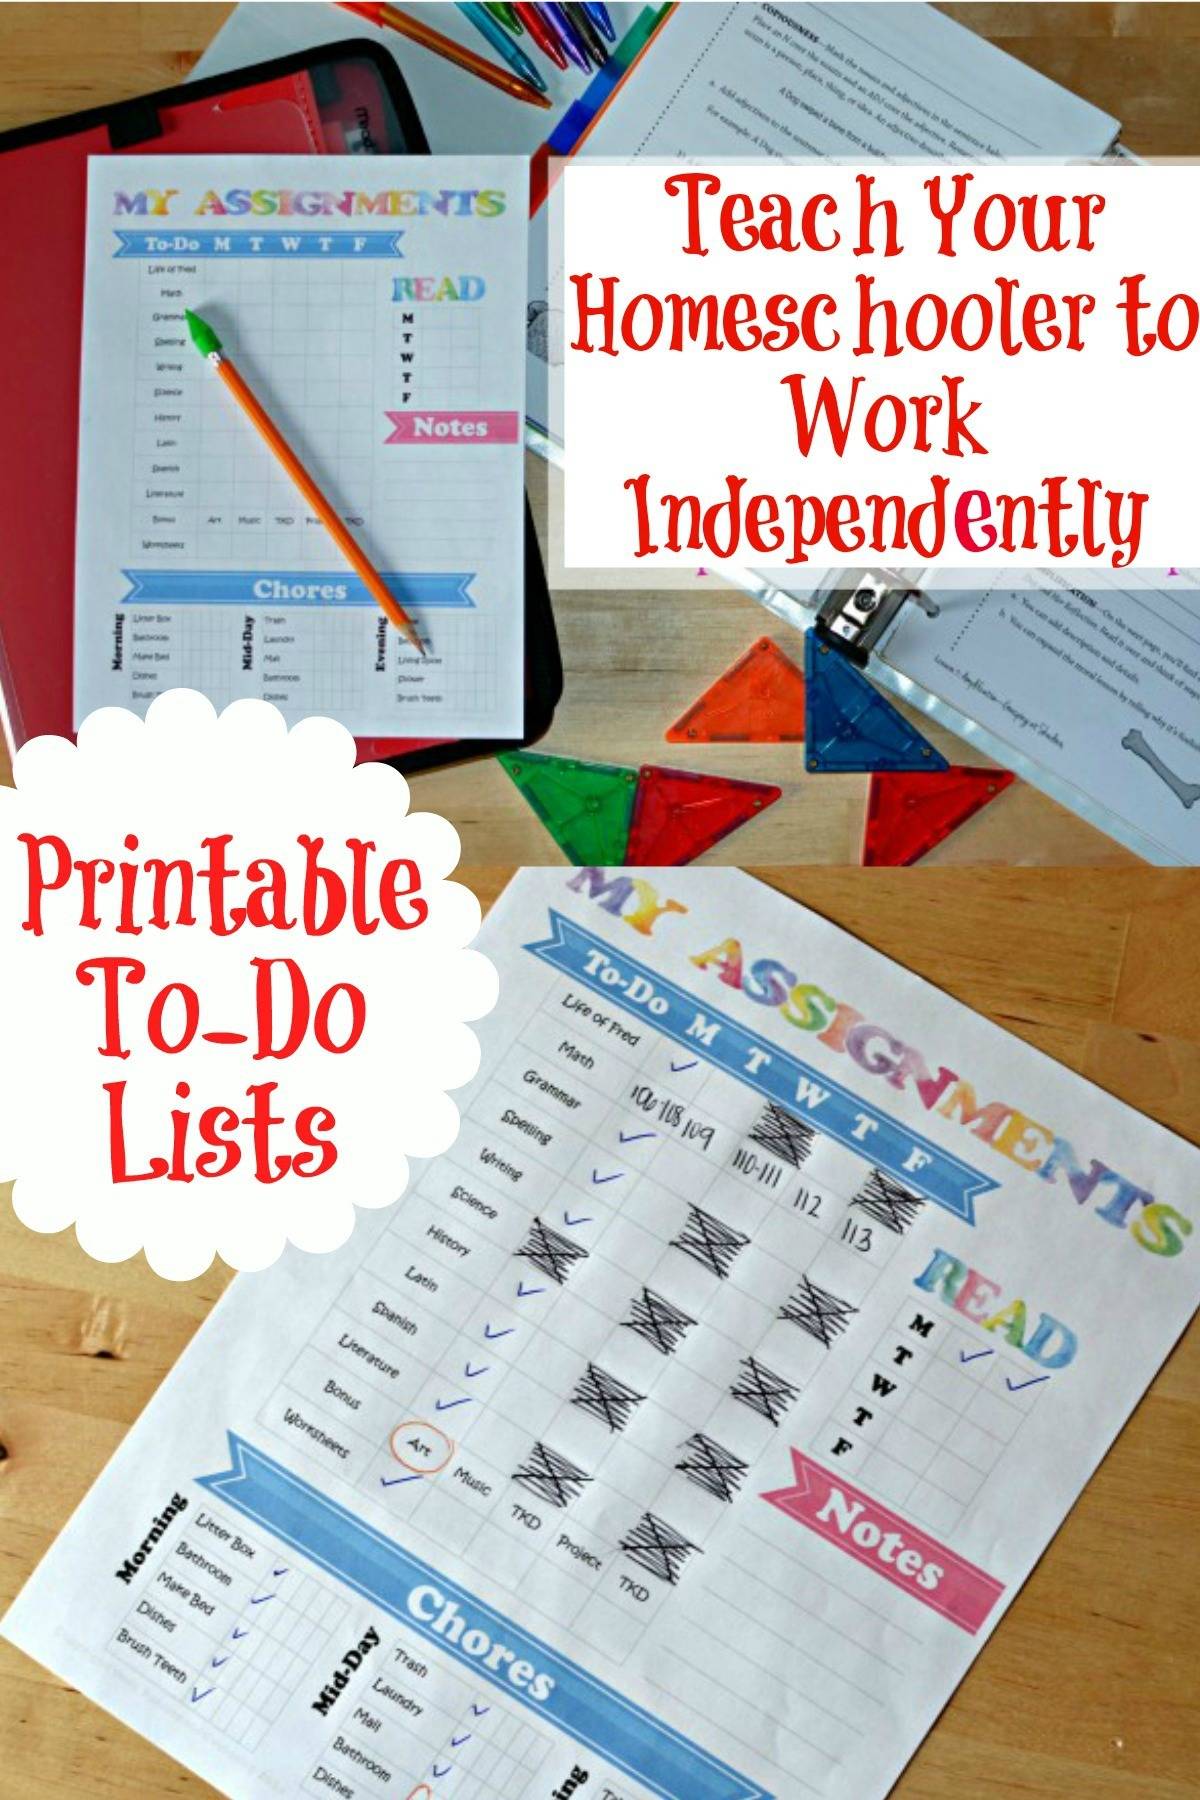 How to Teach Your Homeschooler to Work Independently